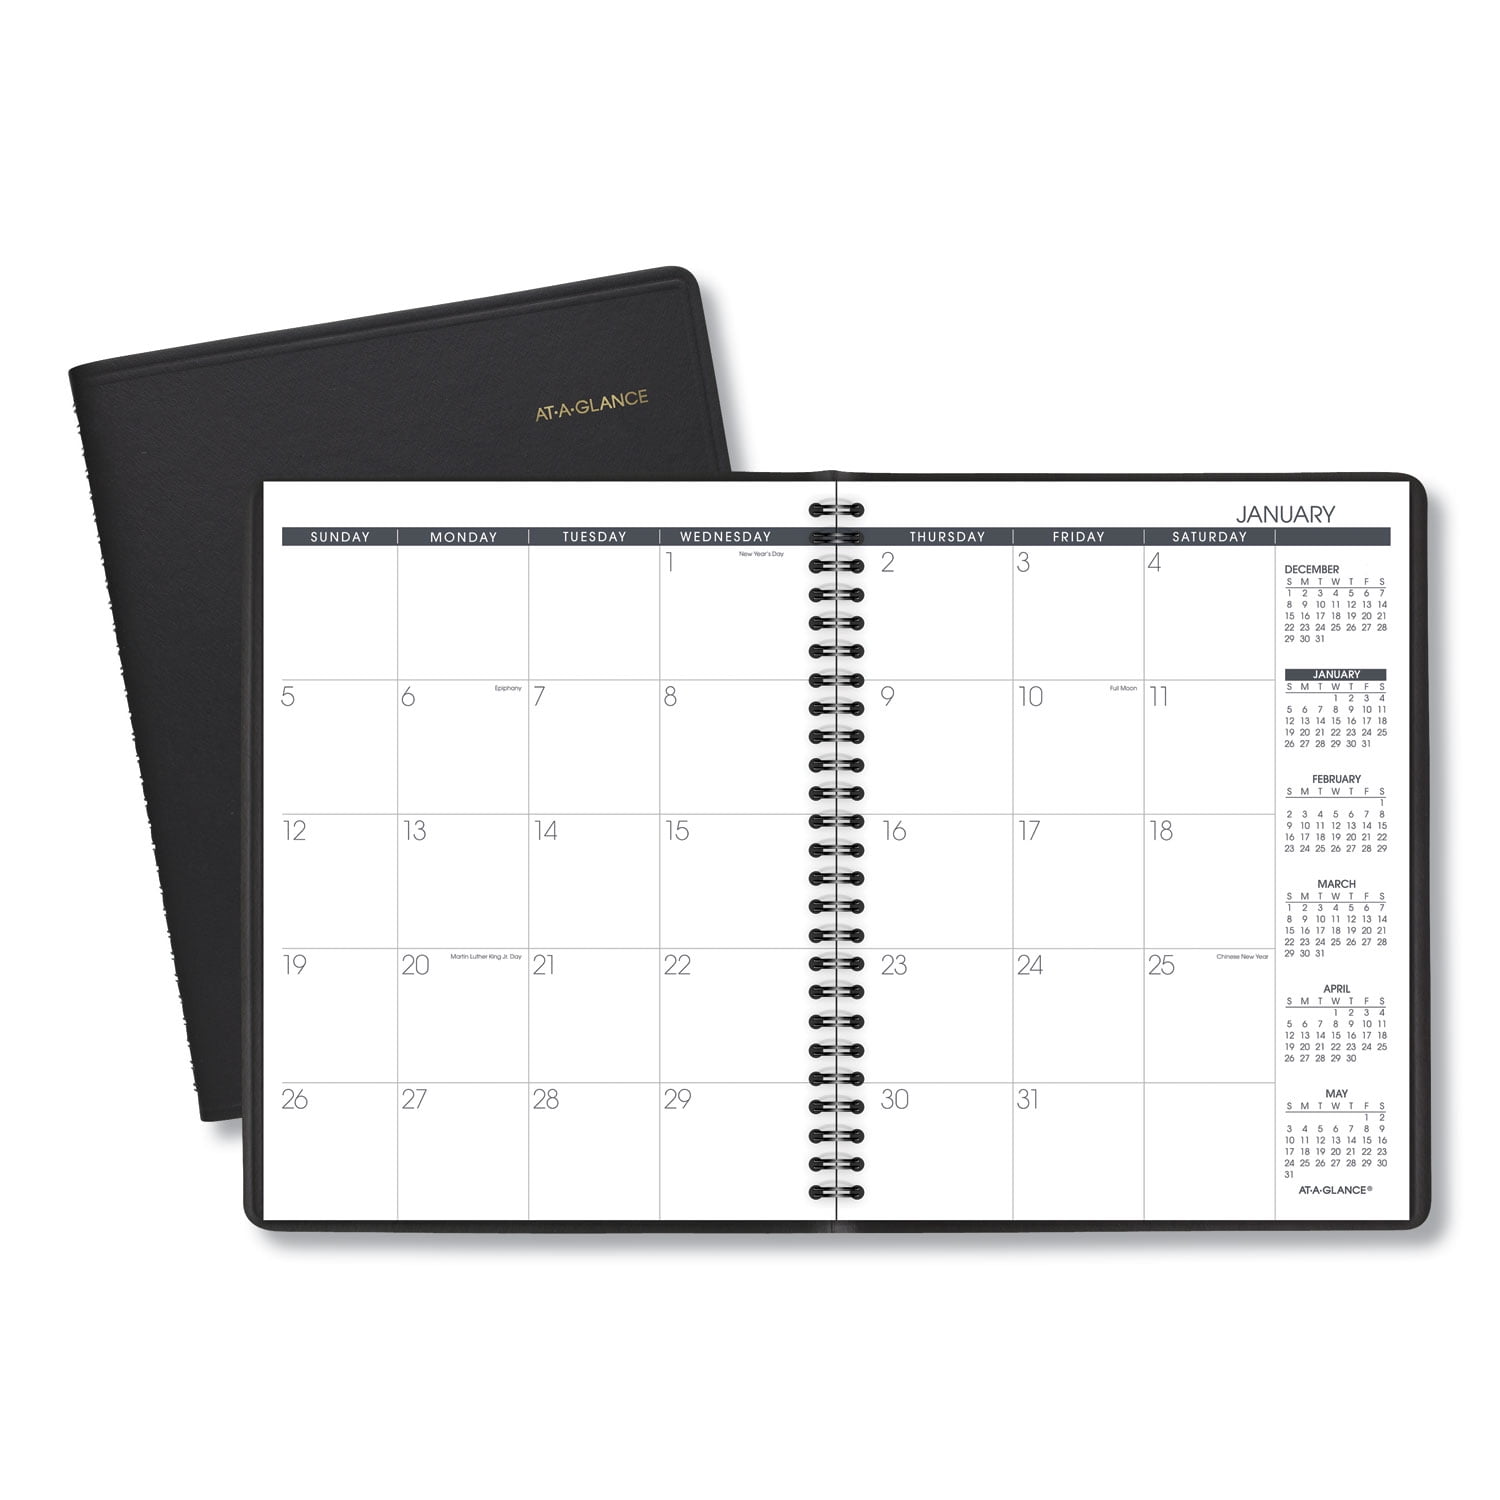 At-A-Glance Monthly Planner 8 3/4 x 6 7/8 Black 2019-2020 7012705 